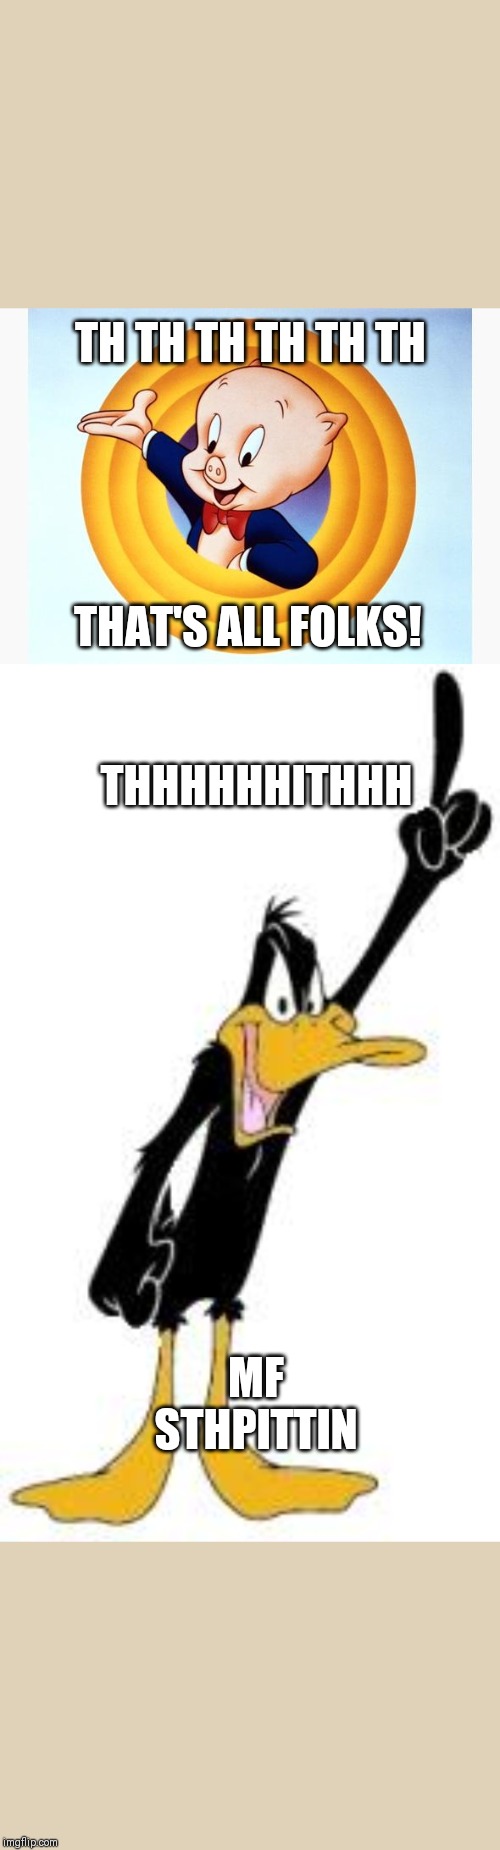 TH TH TH TH TH TH; THAT'S ALL FOLKS! THHHHHHITHHH; MF STHPITTIN | image tagged in porky pig,daffy duck | made w/ Imgflip meme maker